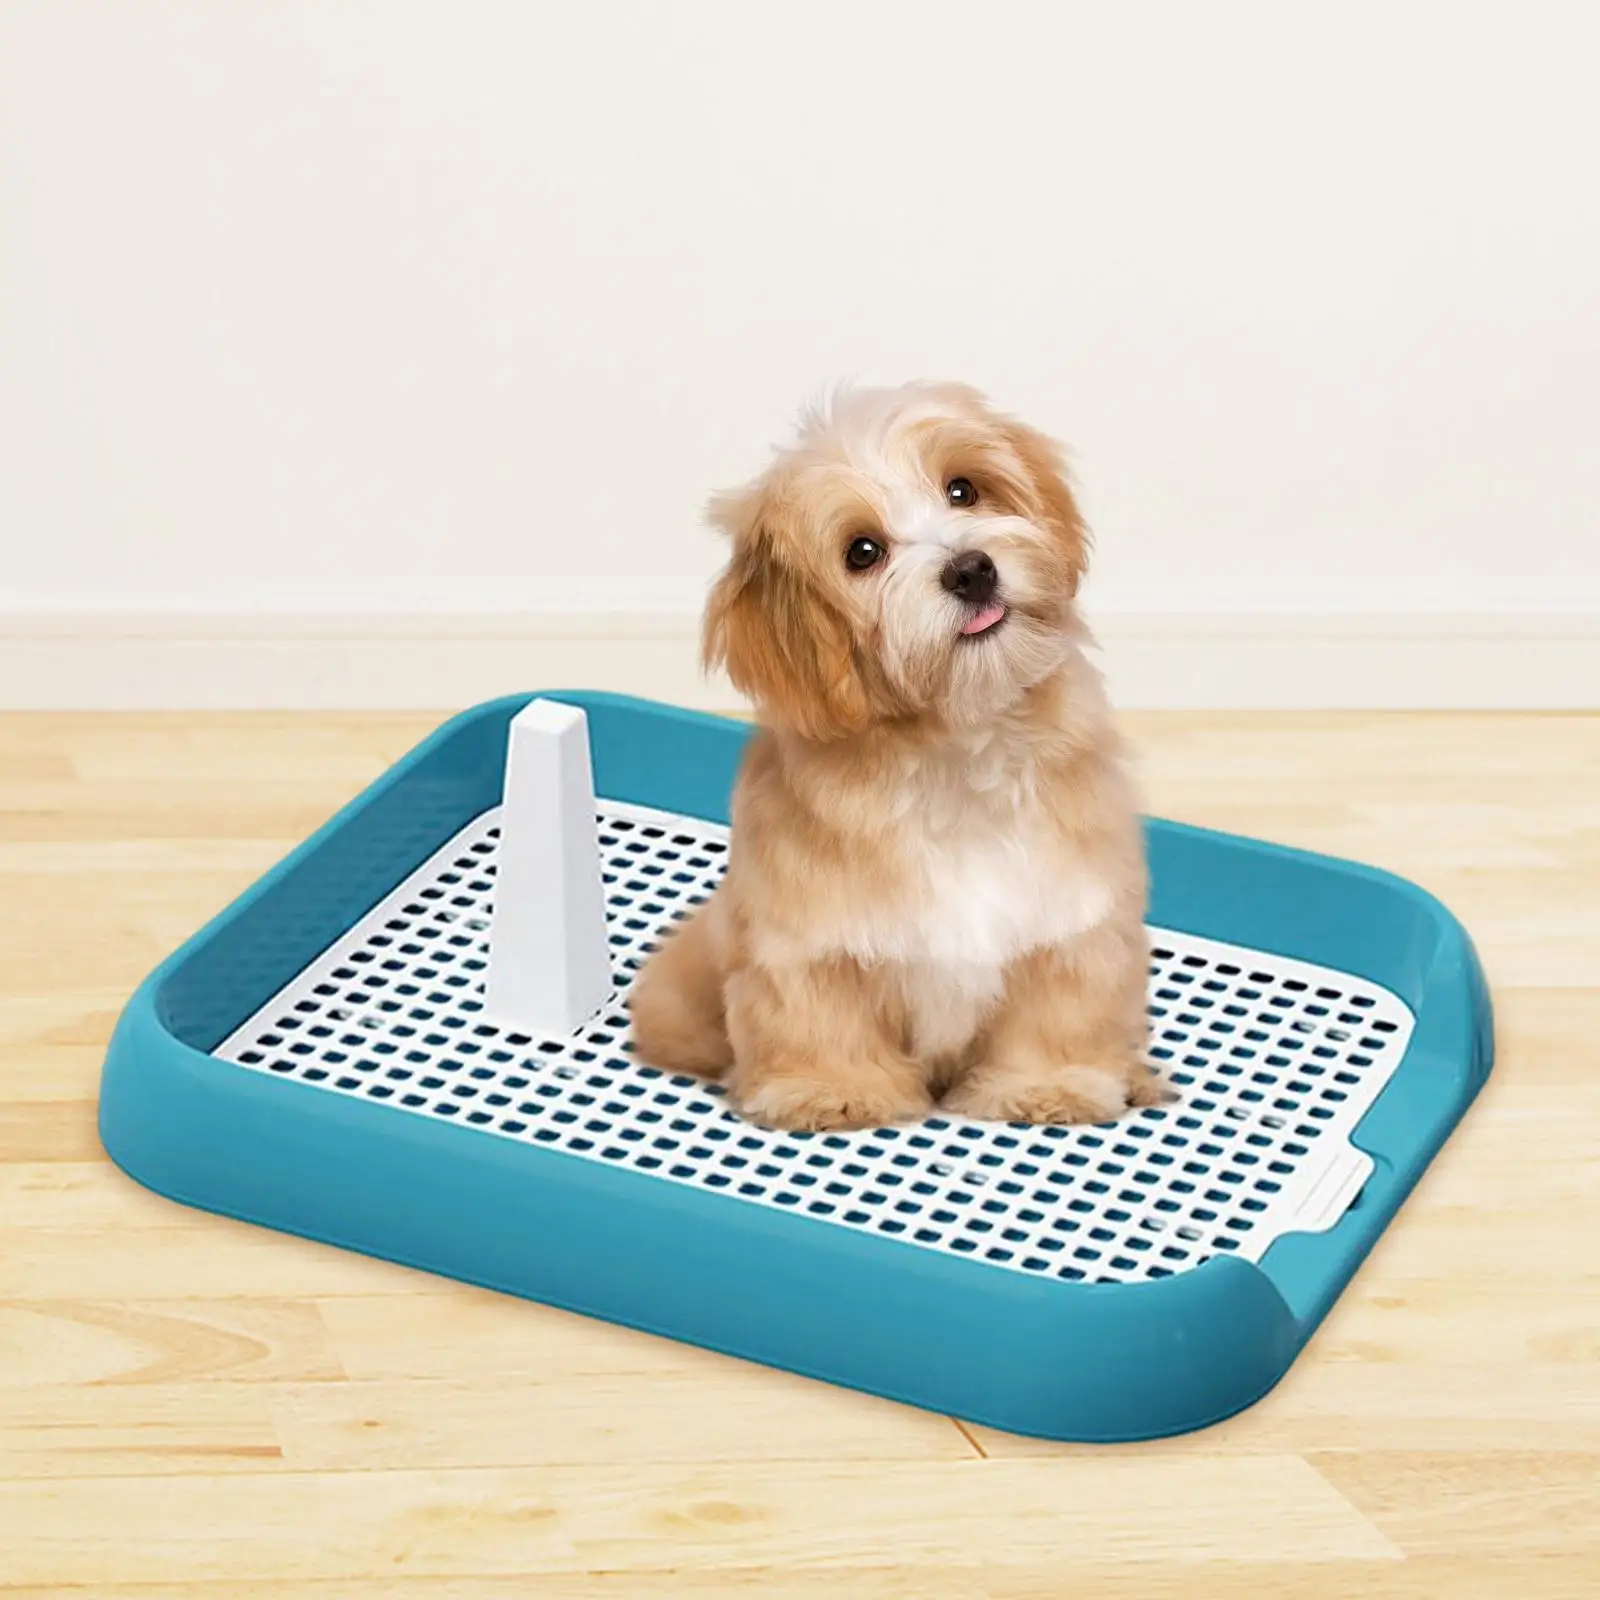 Training Pads Toilet for Puppy Portable Cat Litter Box for Small and Medium Dogs, Bunny, Cats